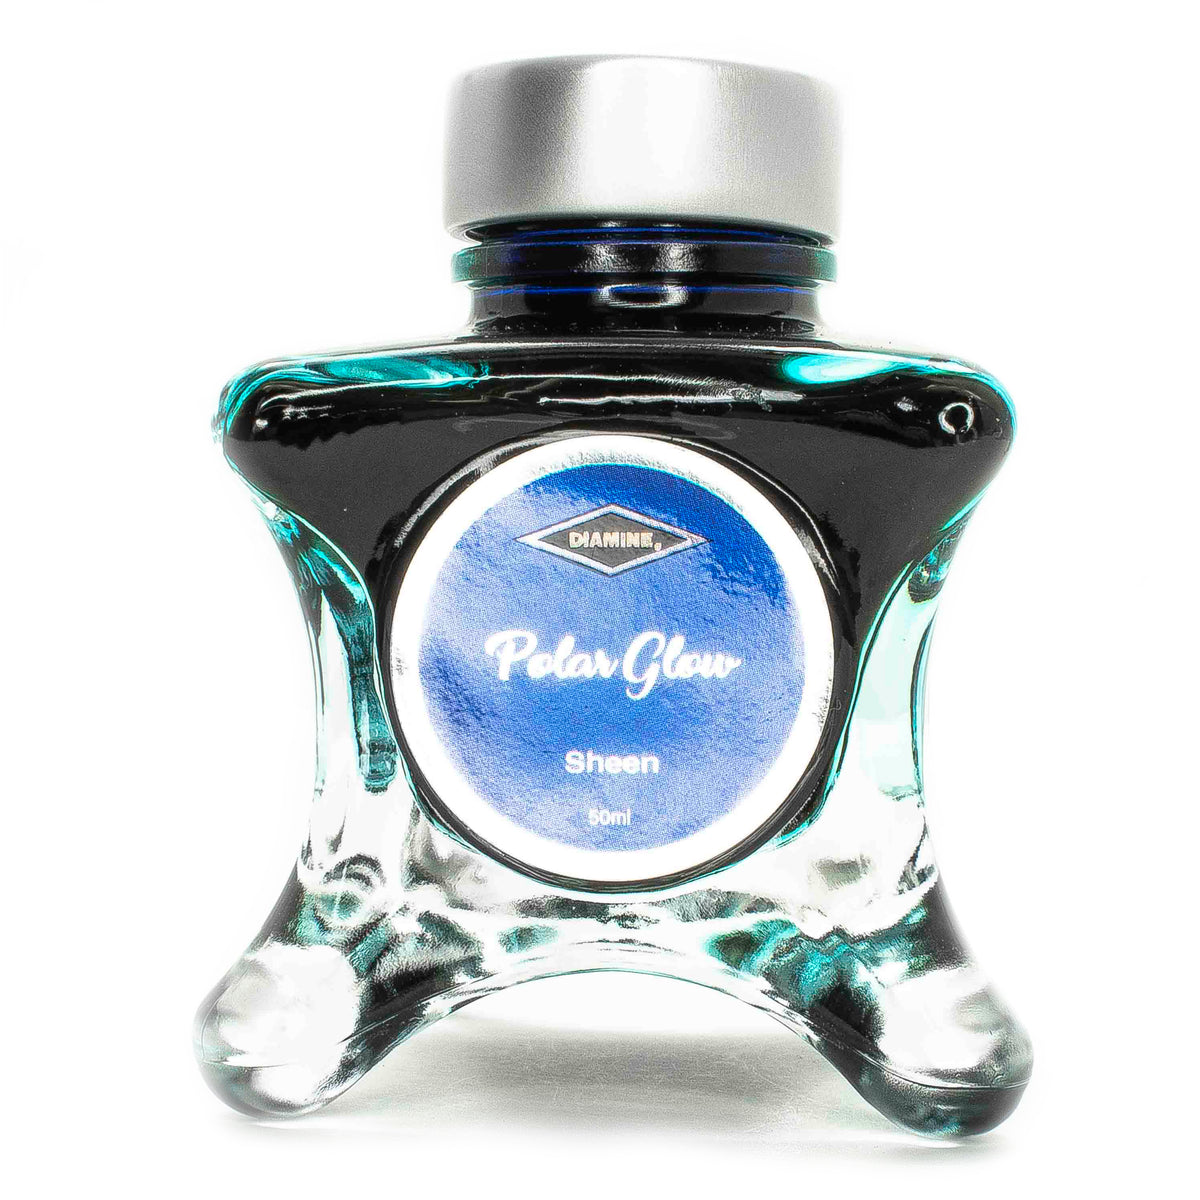 Diamine Blue Edition inks are available in 50ml glass bottle that features a whimsical shape.